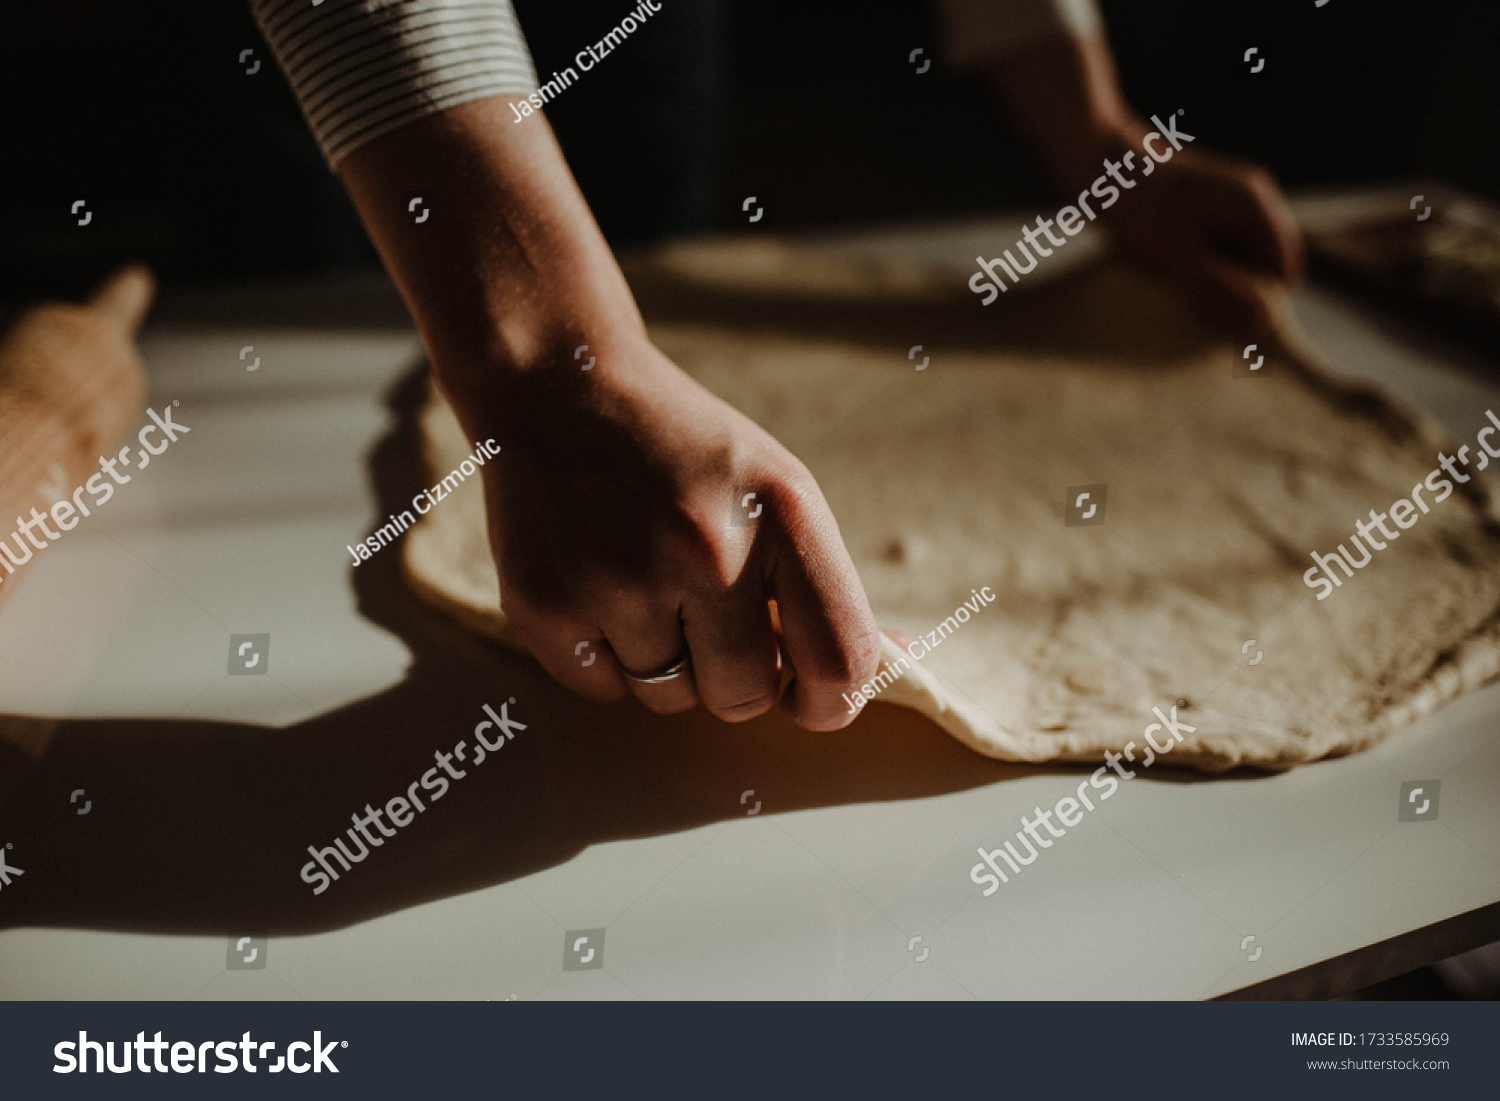 Wife making a homemade doughy pastry food with smoked cheese during Ramadan for dinner during the sunset light in the home on the wooden table #1733585969